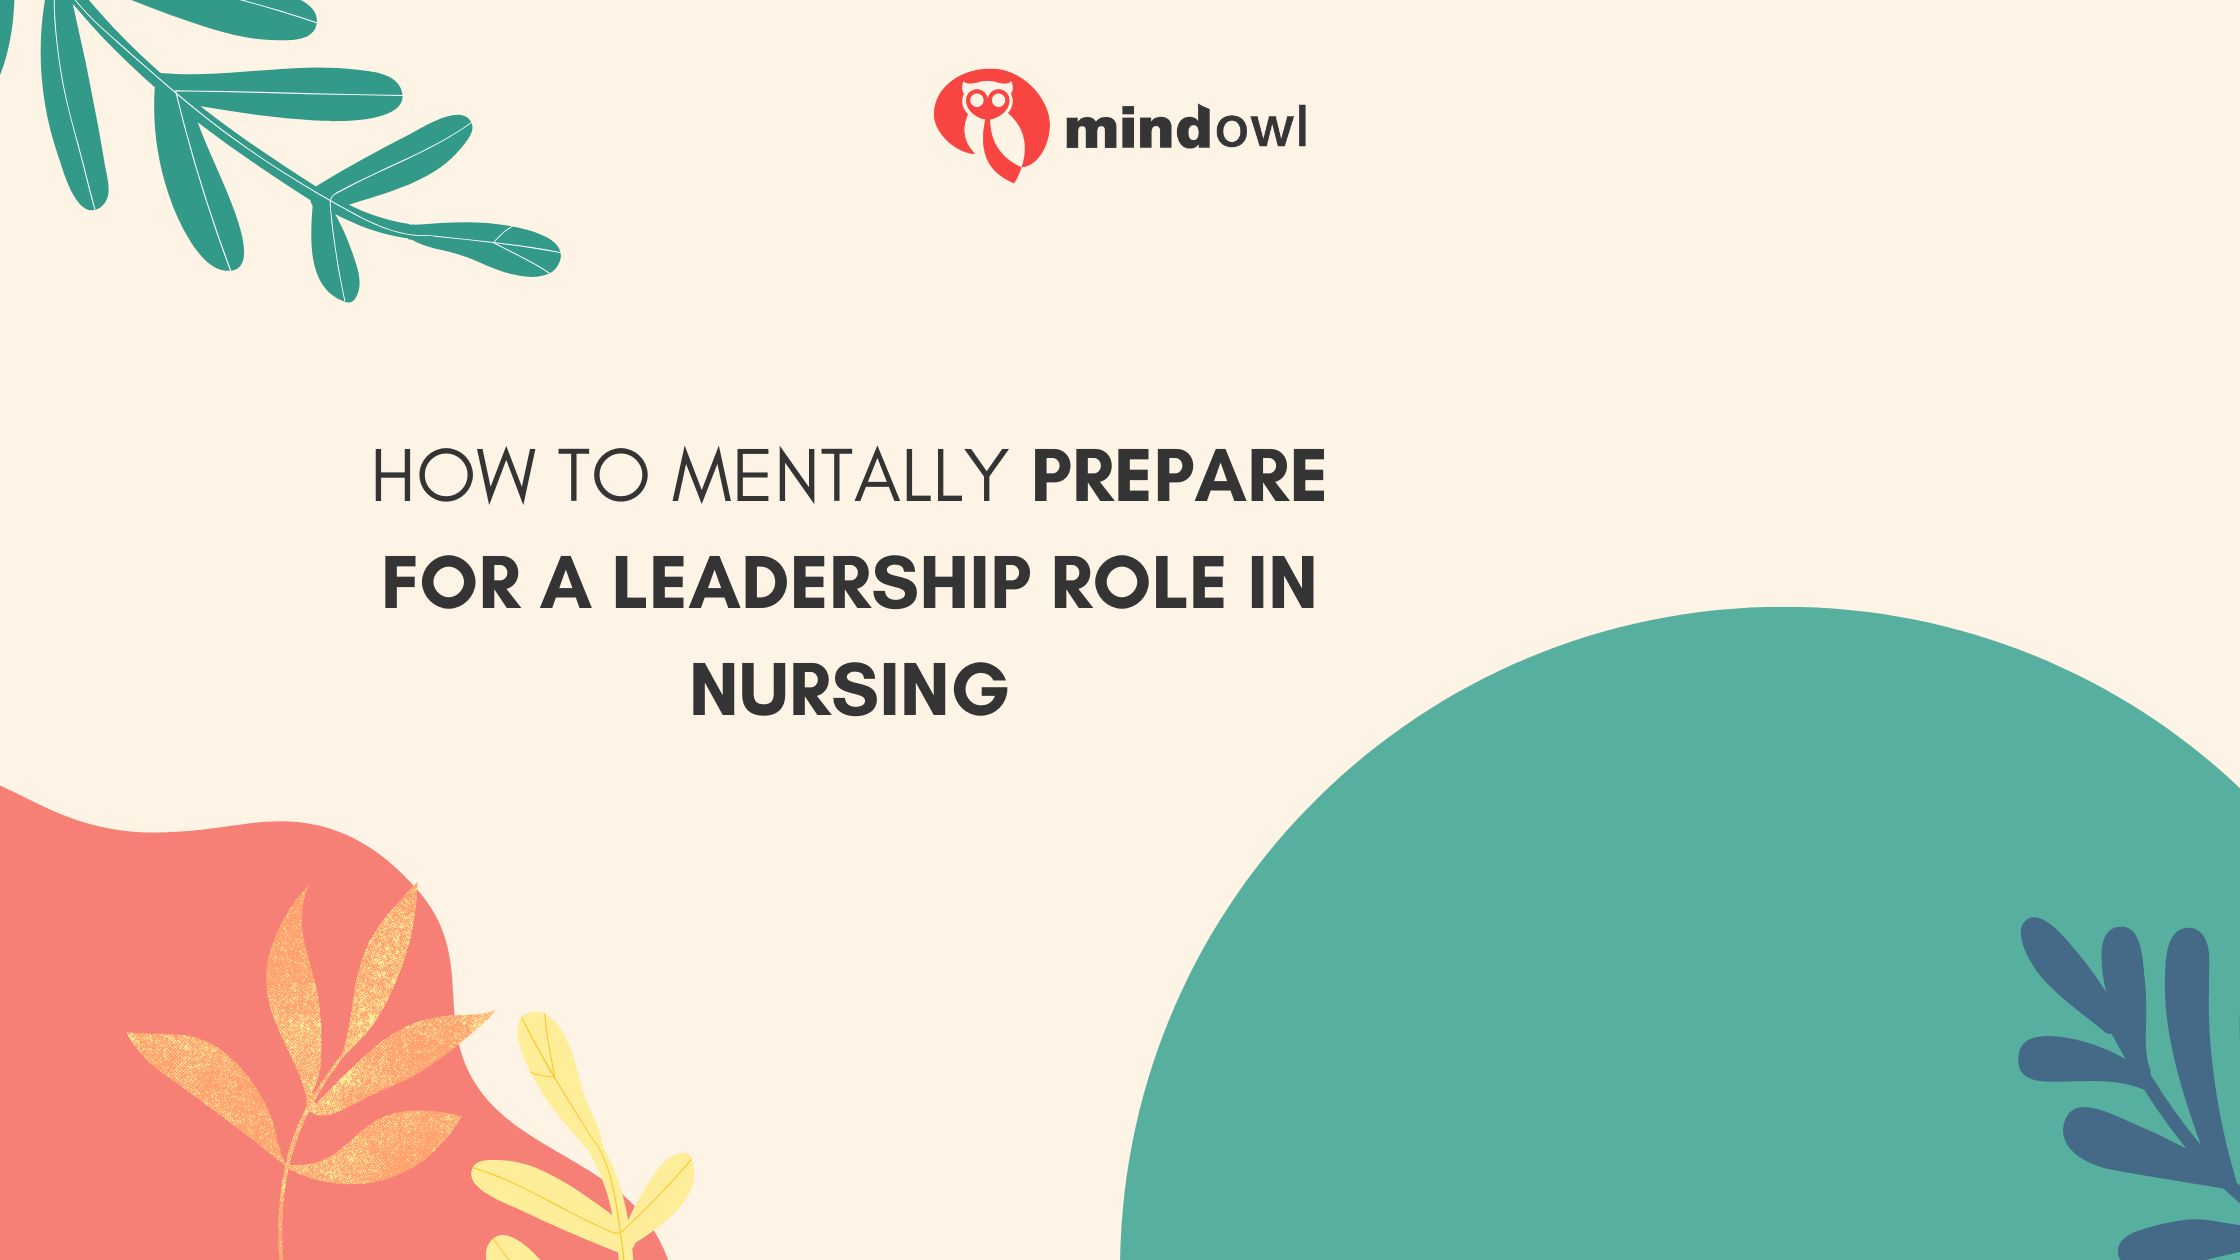 How to Mentally Prepare for a Leadership Role in Nursing